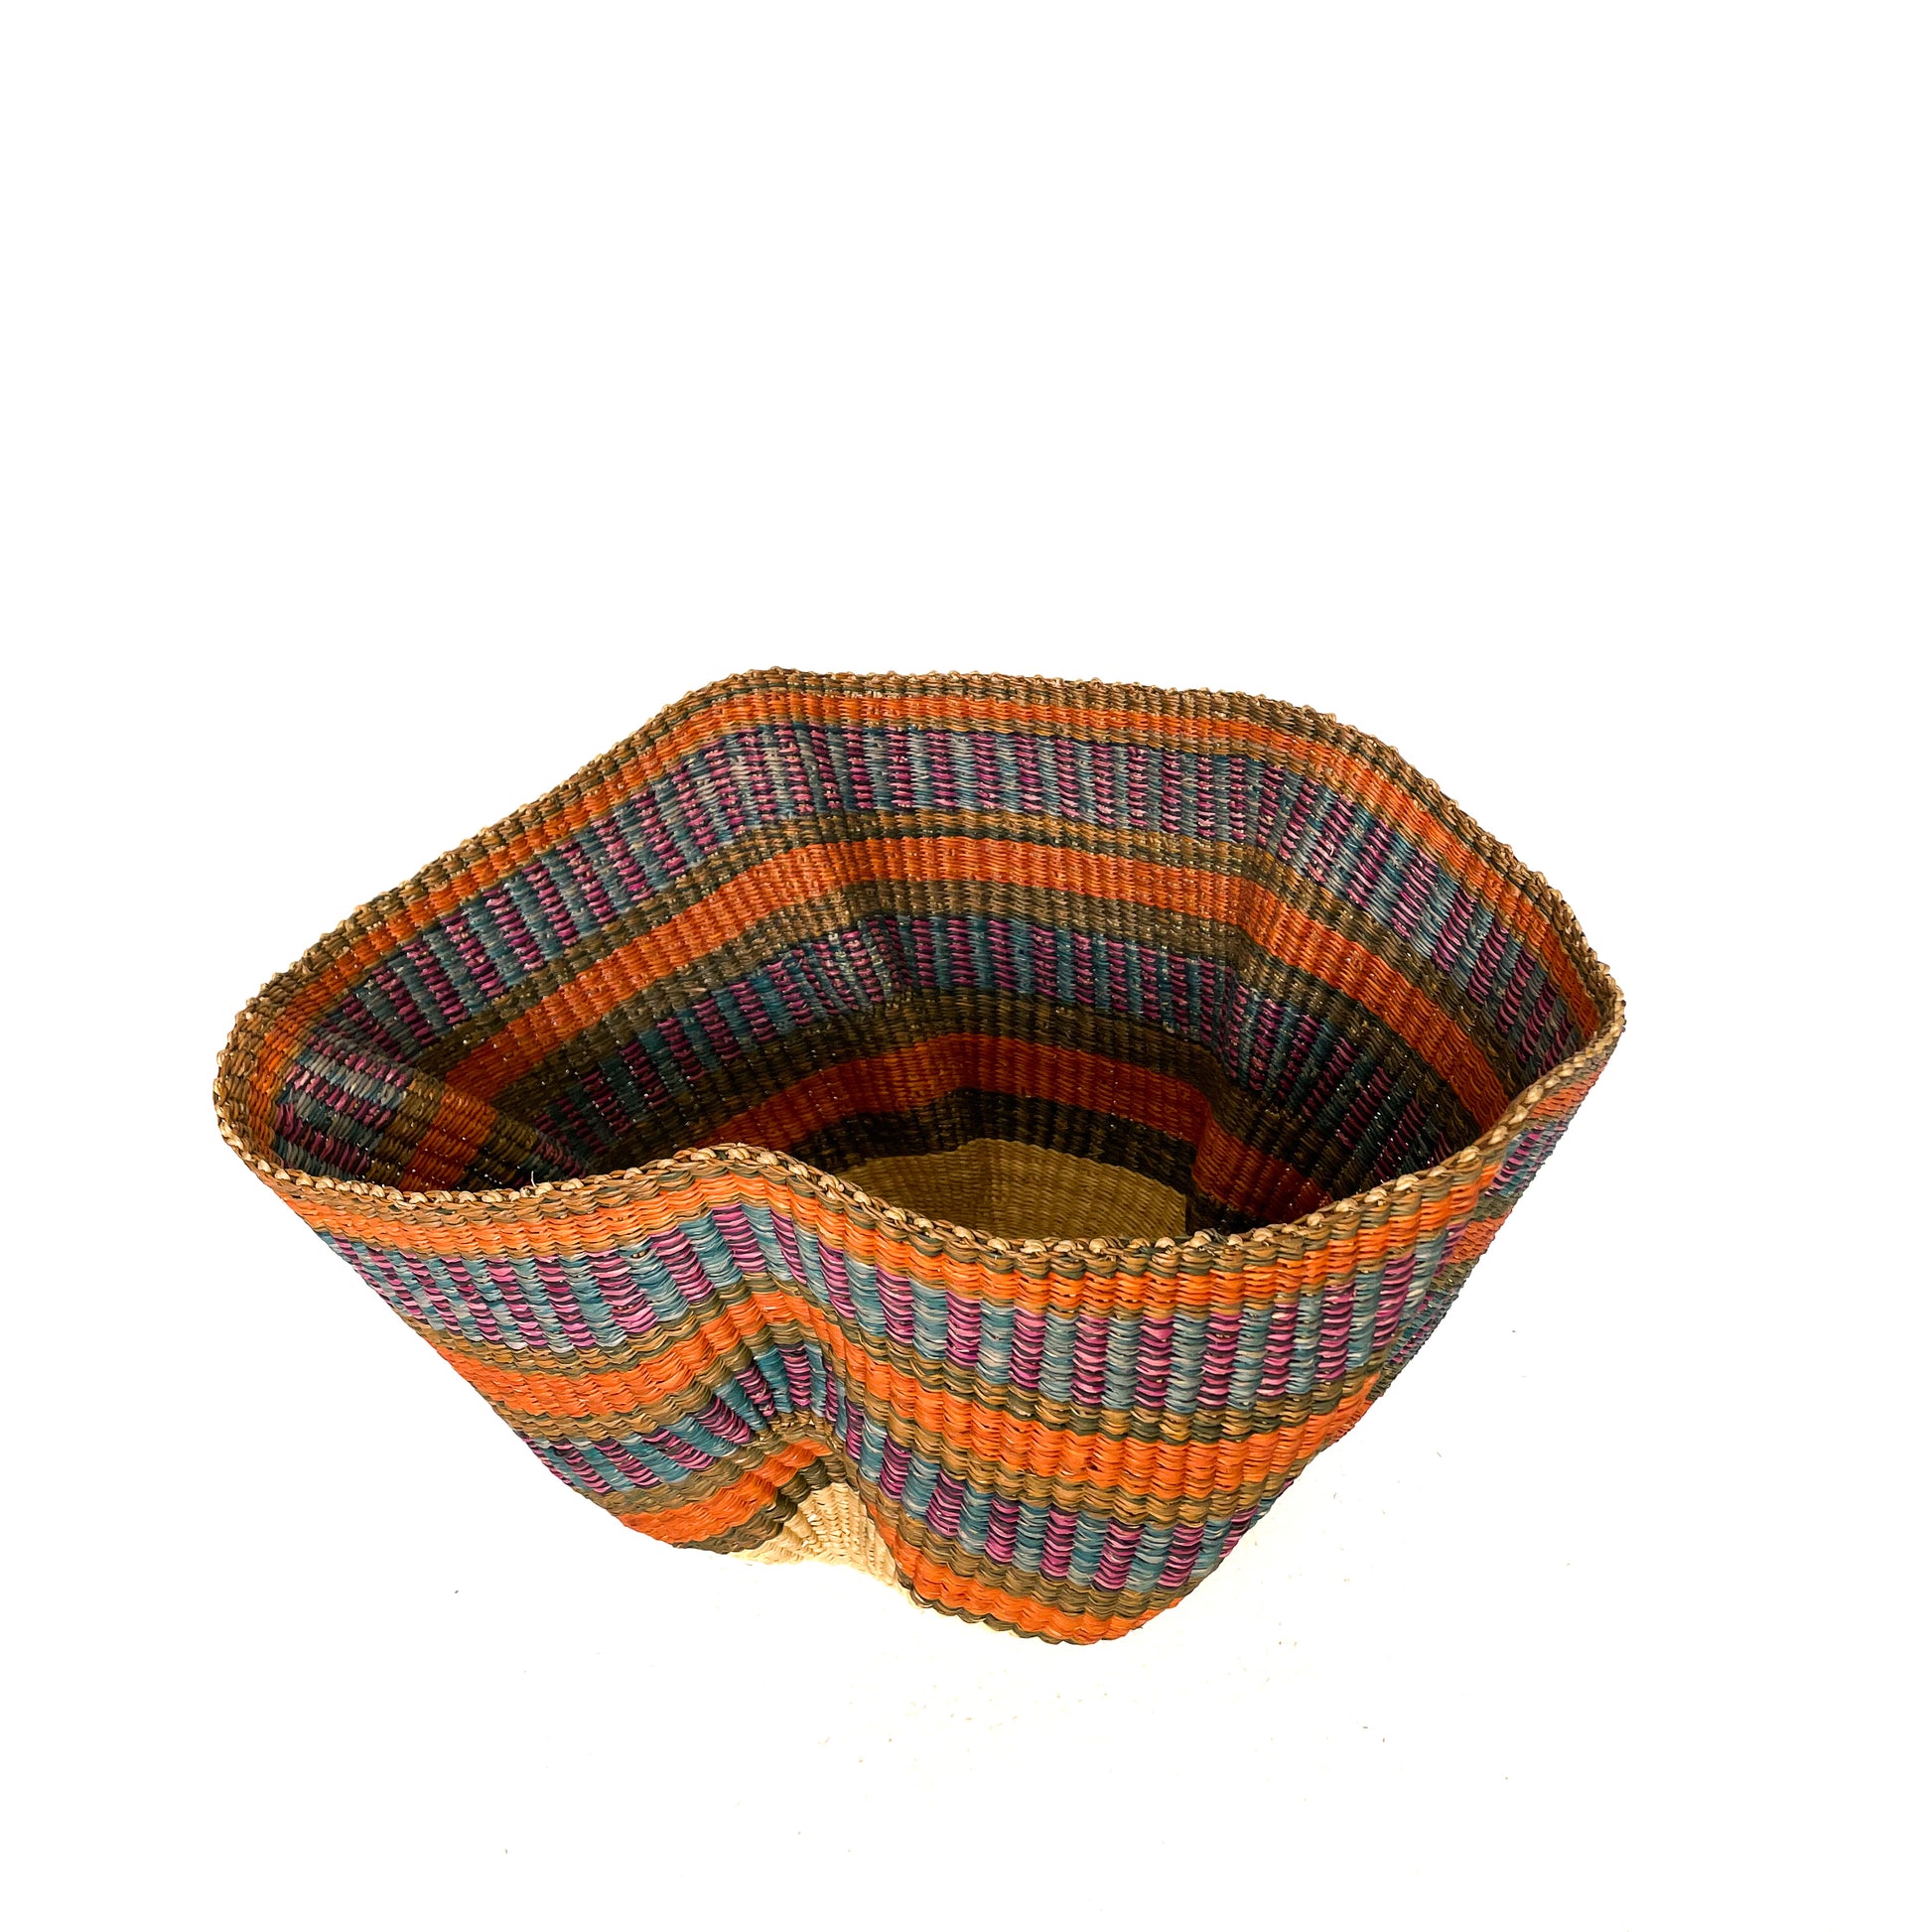 Frafra Woven Bowl Earthy Orange with Muted Blue and Purple